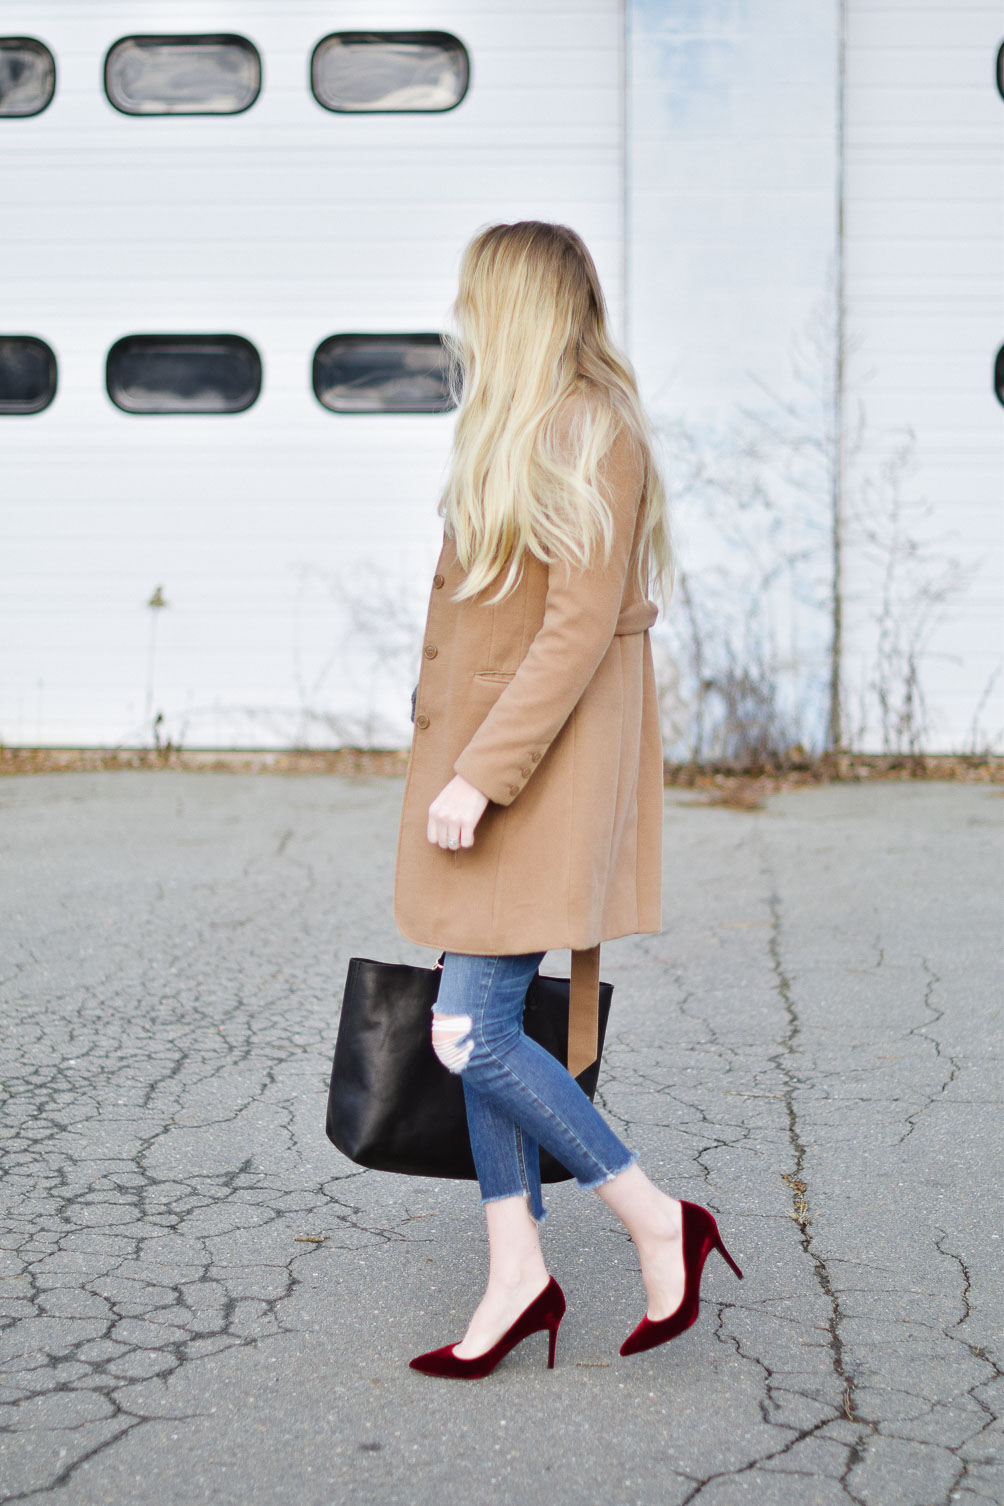 styling a layered winter outfit with this camel coat, chunky sweater, distressed denim, and velvet pumps